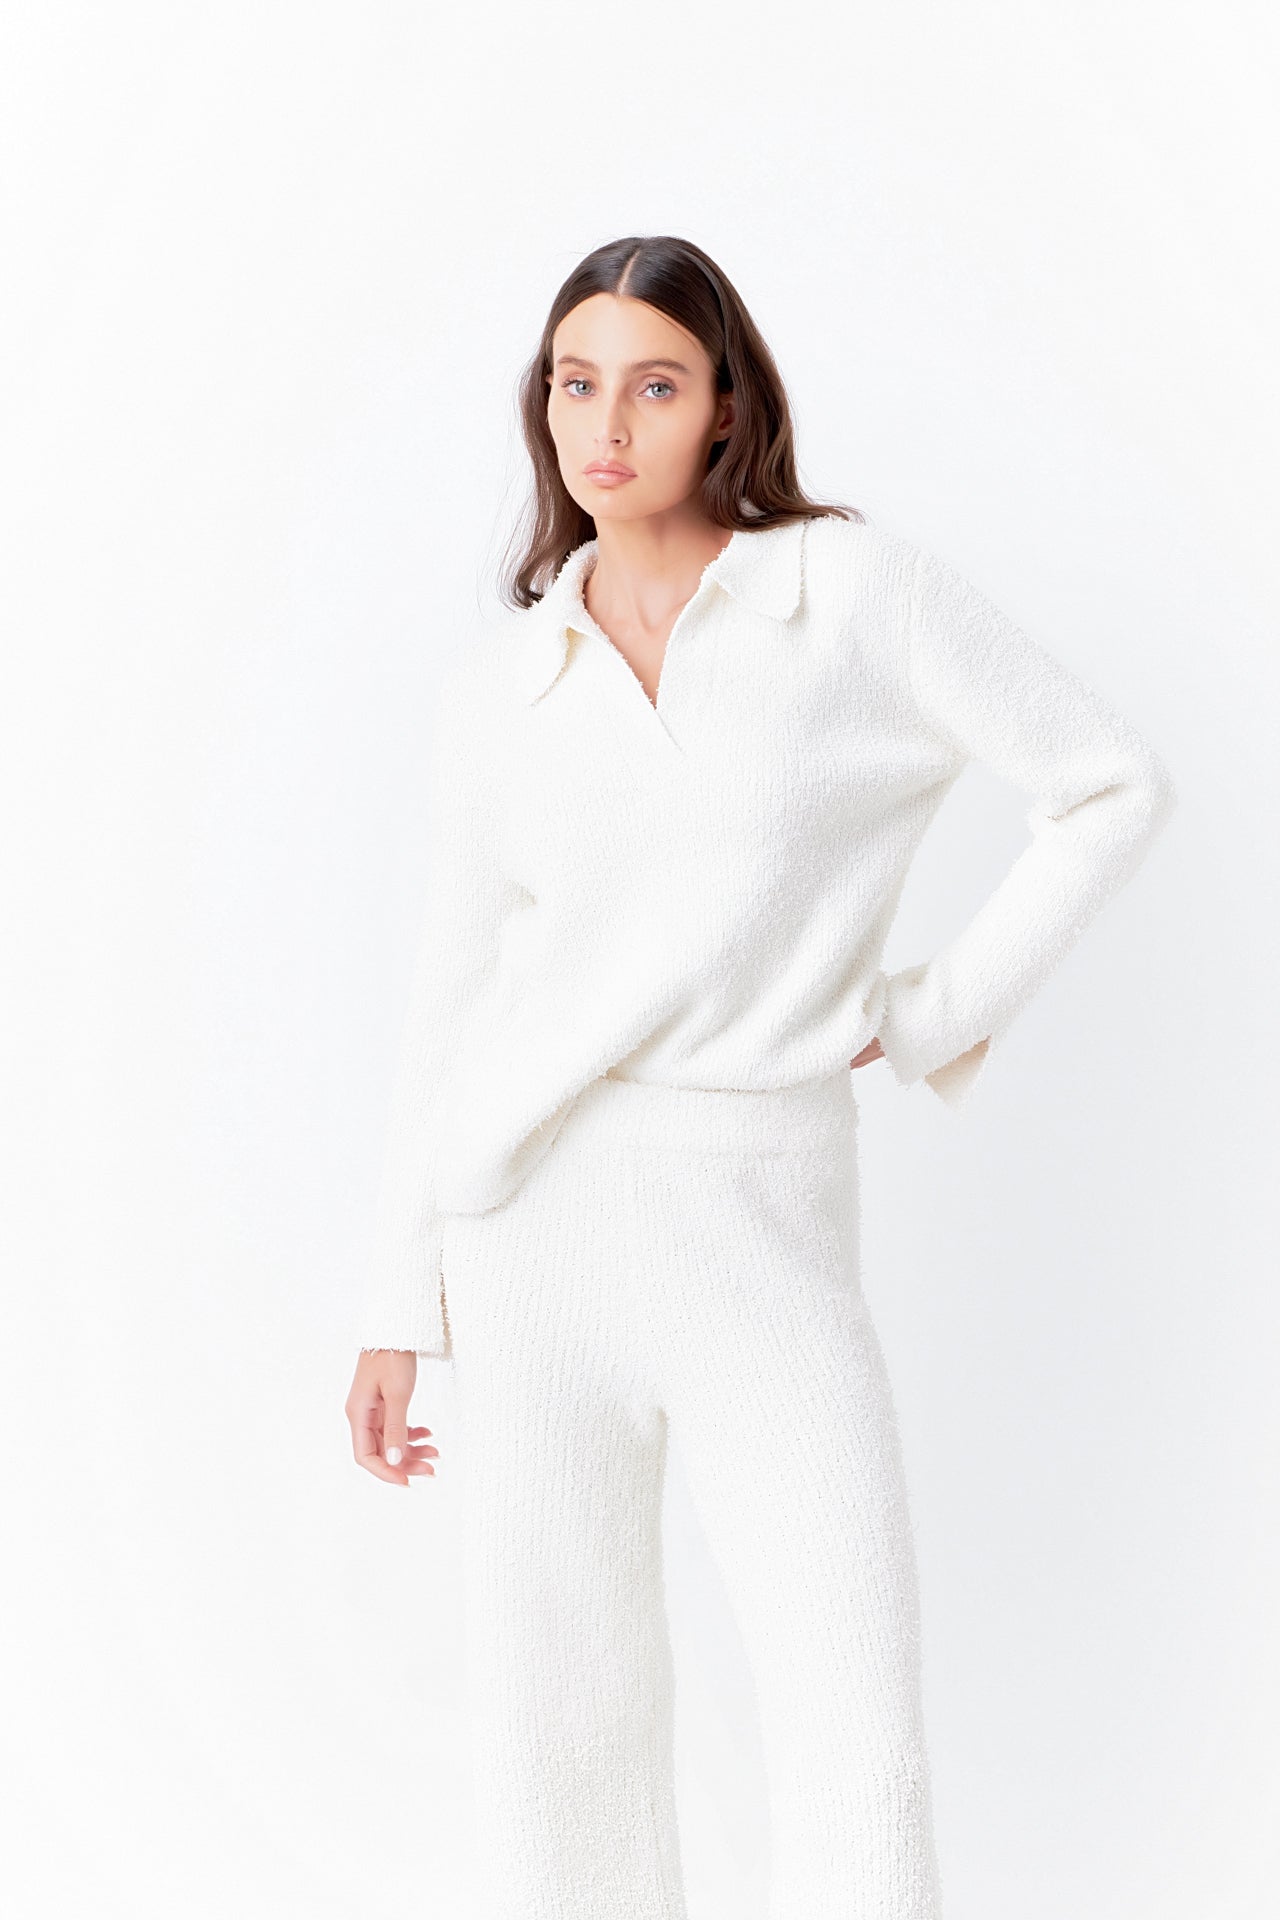 ENDLESS ROSE - Textured Fuzzy Collared Sweater - SWEATERS & KNITS available at Objectrare